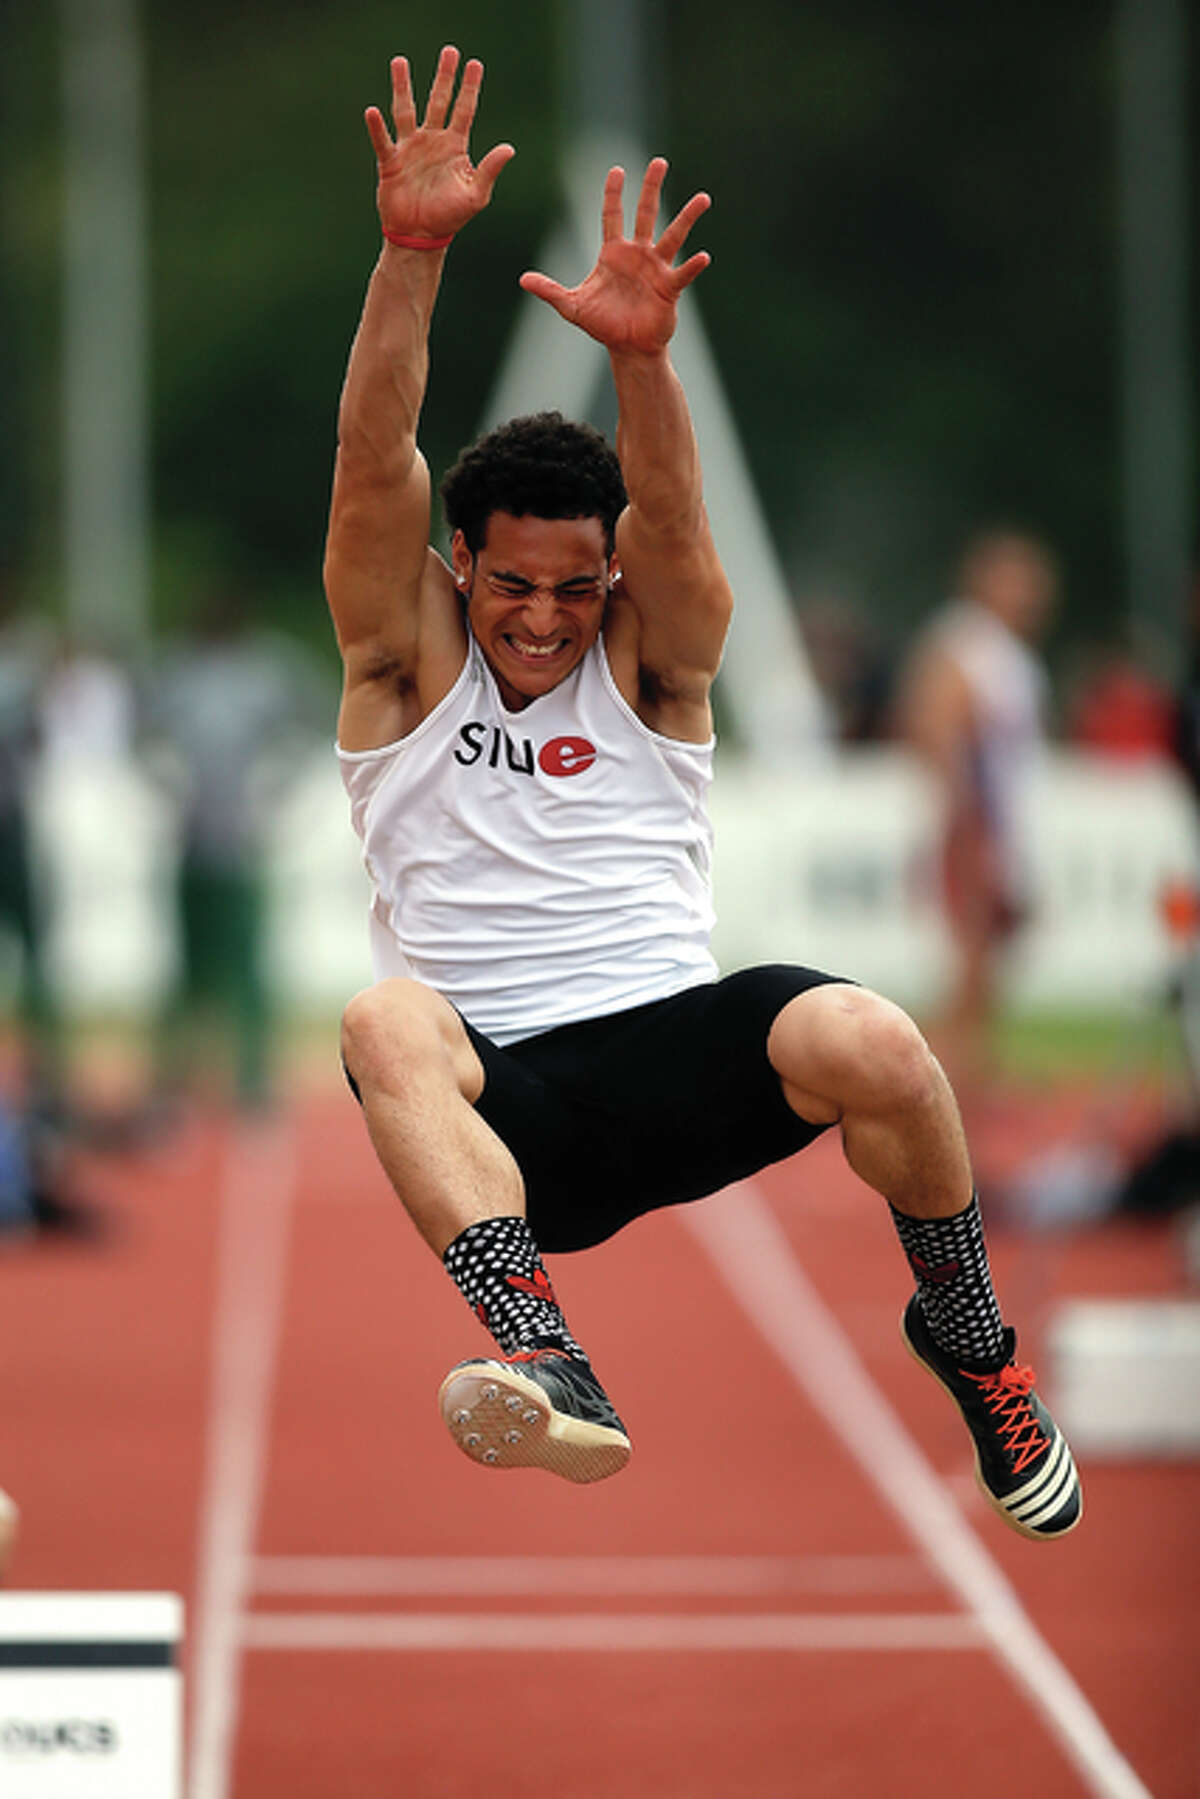 SIUE’s Julian Harvey, a senior from Edwardsville, placed fifth in the long jump and earned All-America honors Friday at the NCAA Division I Indoor Track and Field Championships in College Station, Texas.